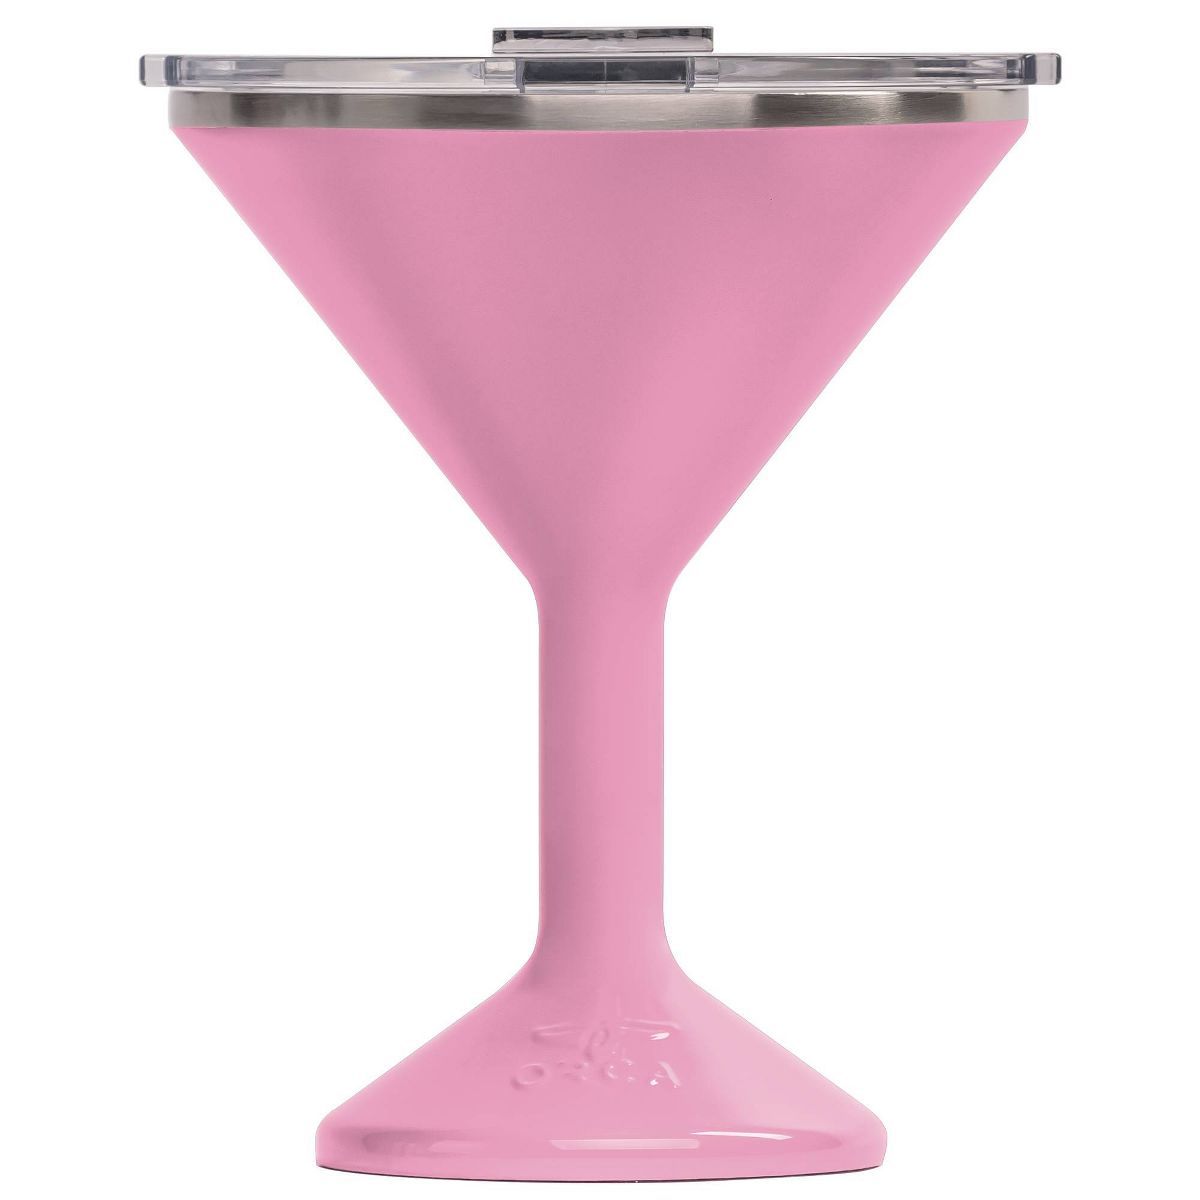 ORCA Coolers 13oz Tini Stainless Steel Lidded Martini Tumbler - Dusty Rose | Target